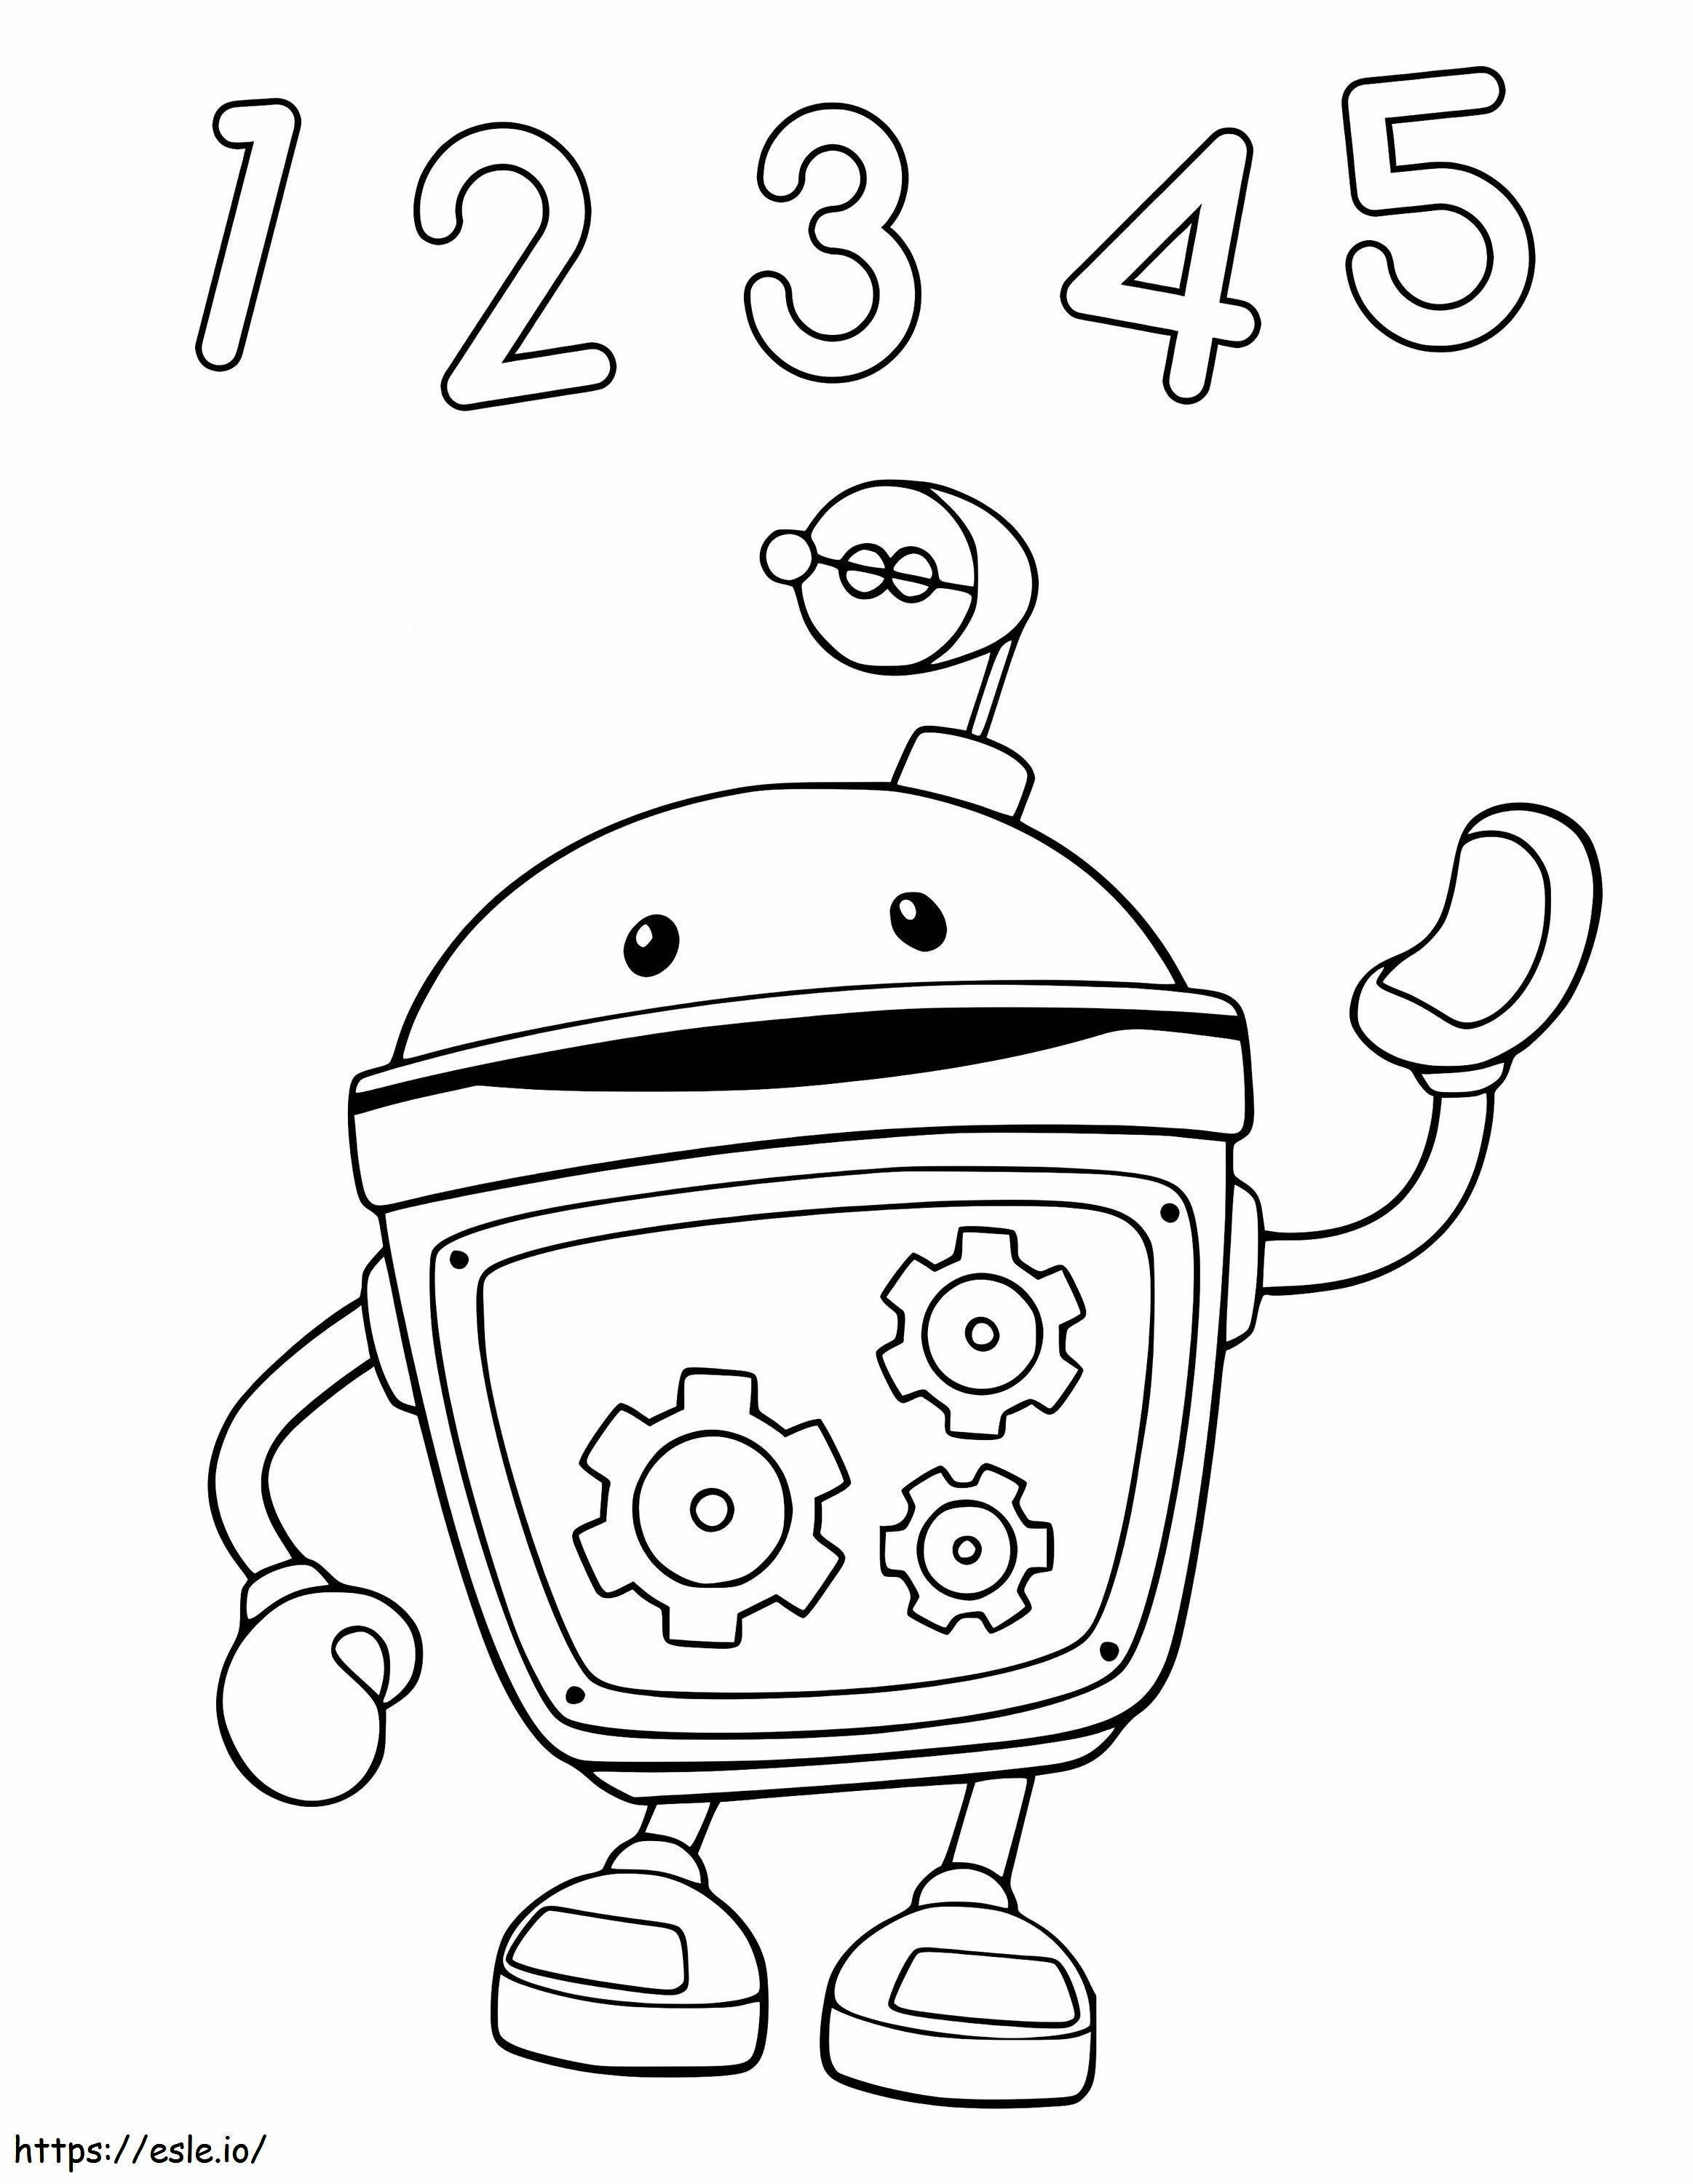 1598487322 Qy949P6 coloring page